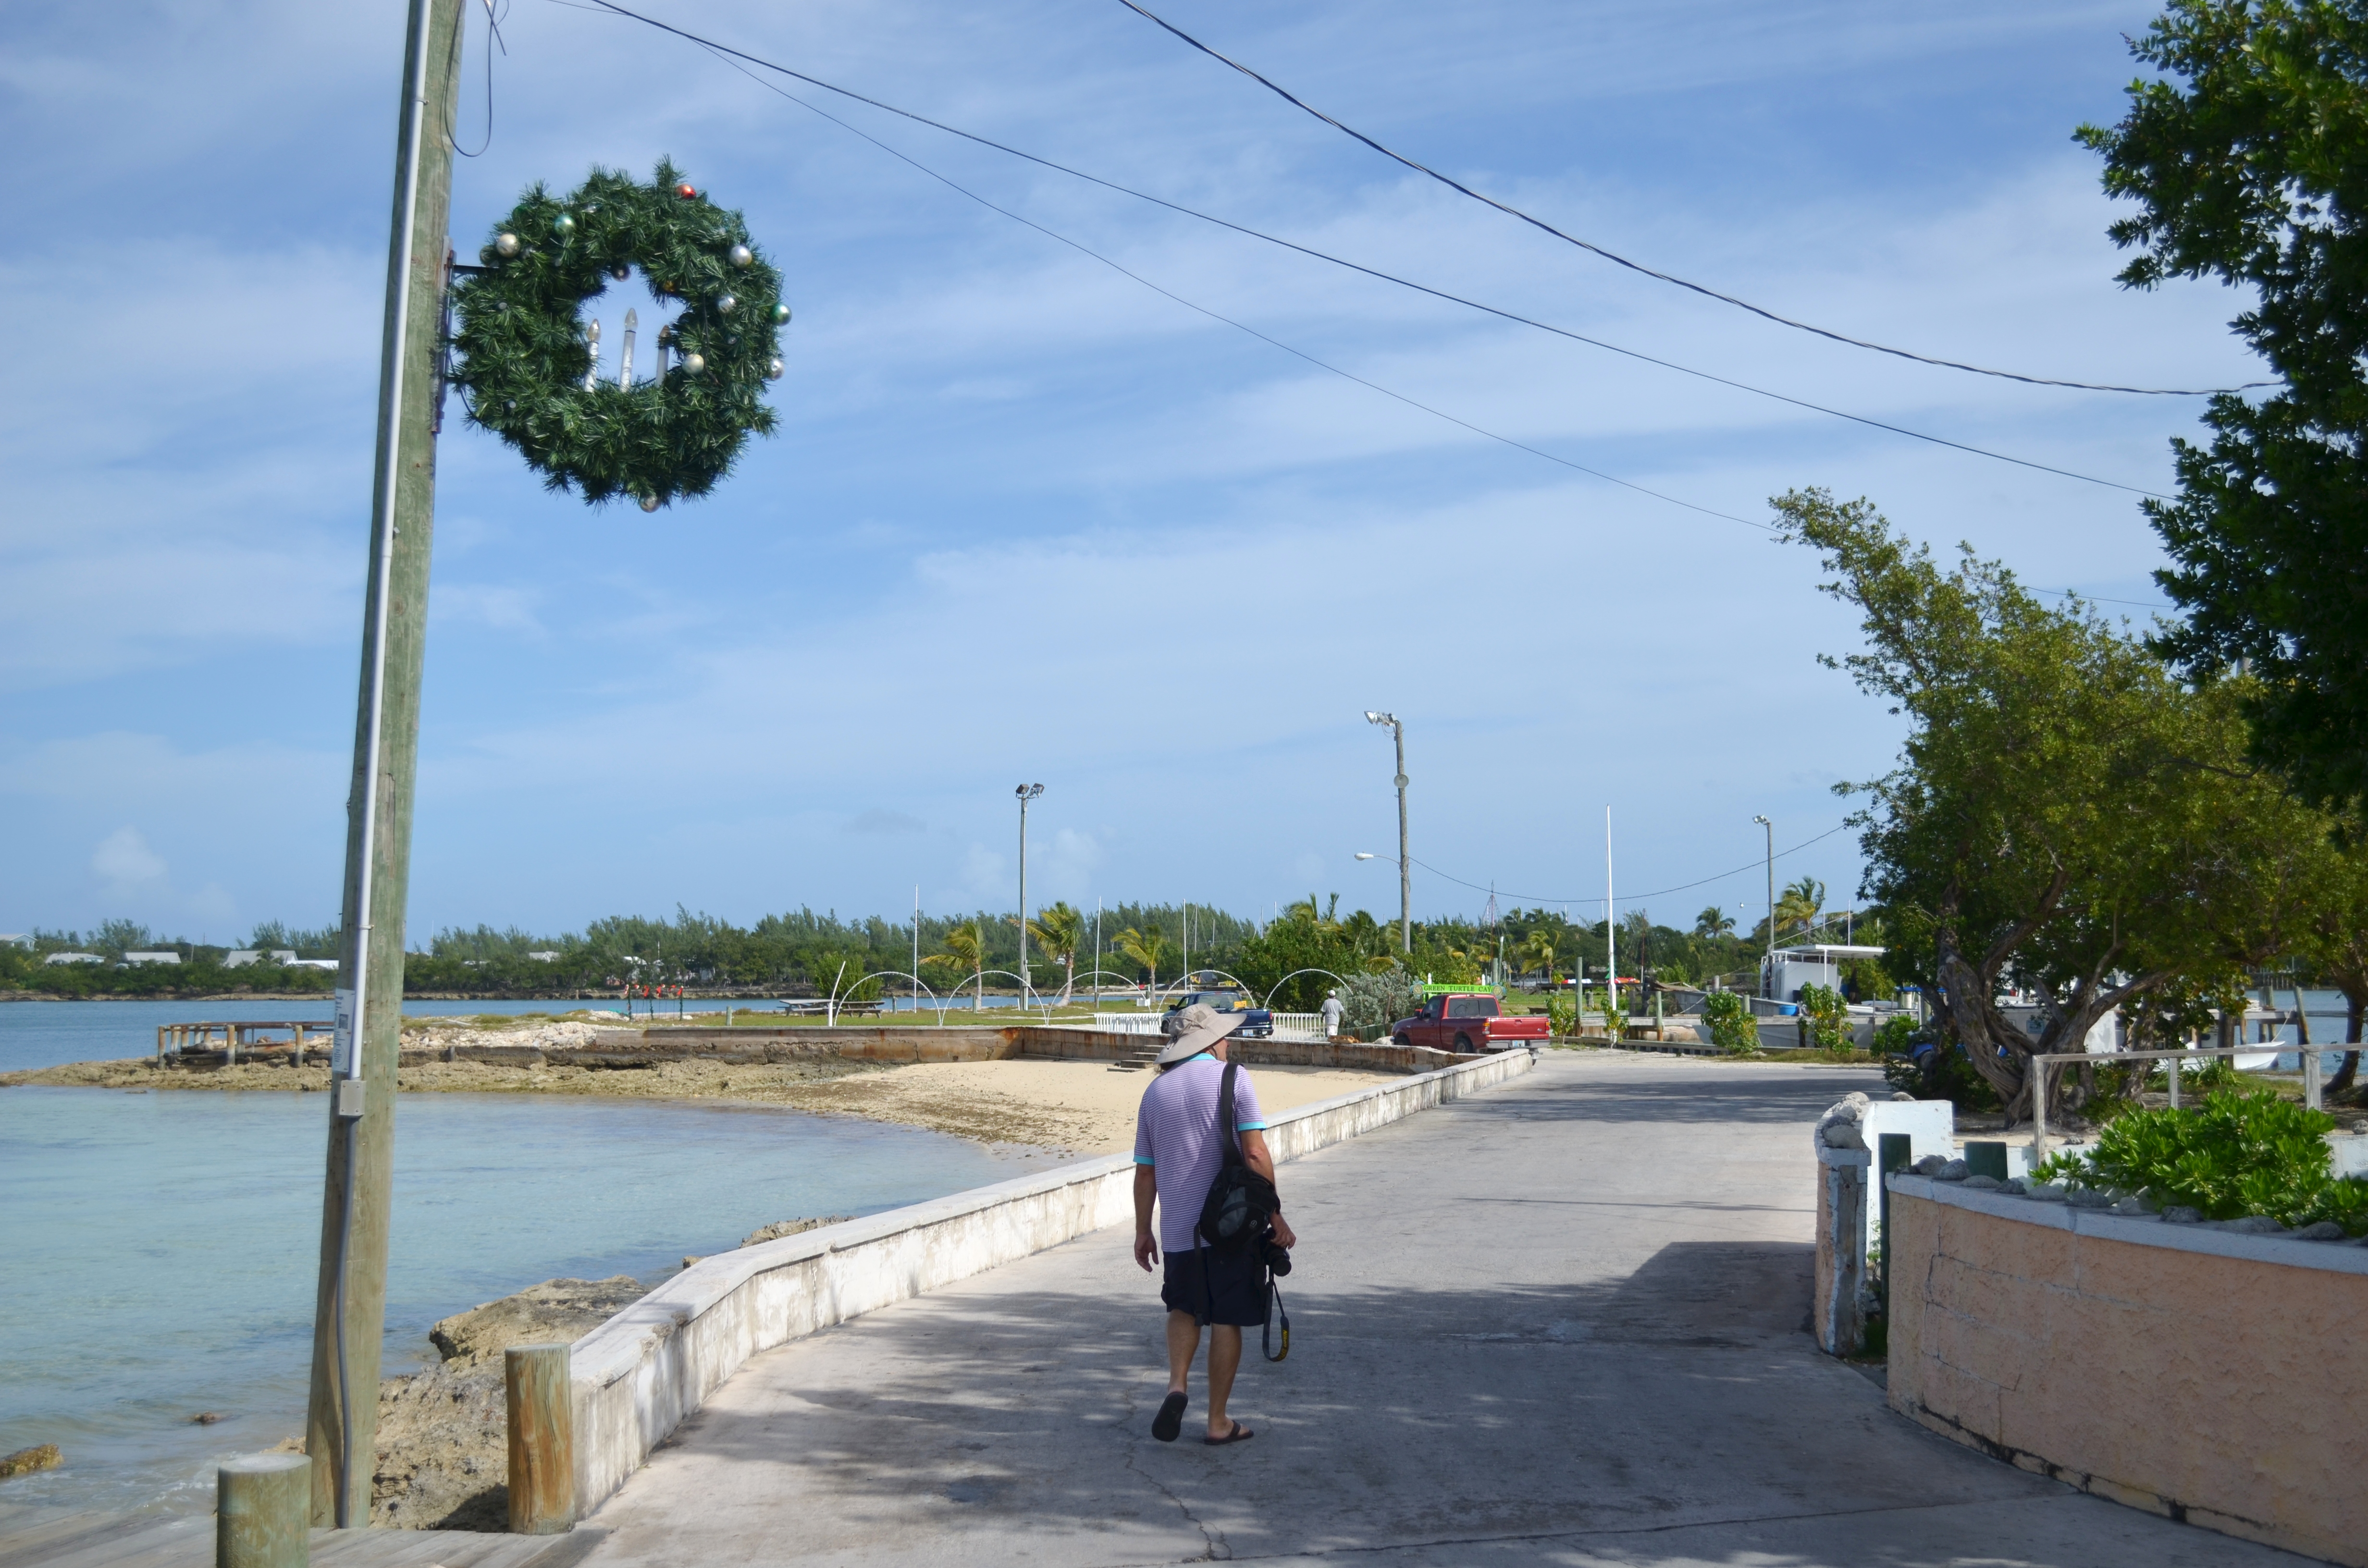 Mark walks through New Plymouth, Green Turtle Cay on Christmas Eve